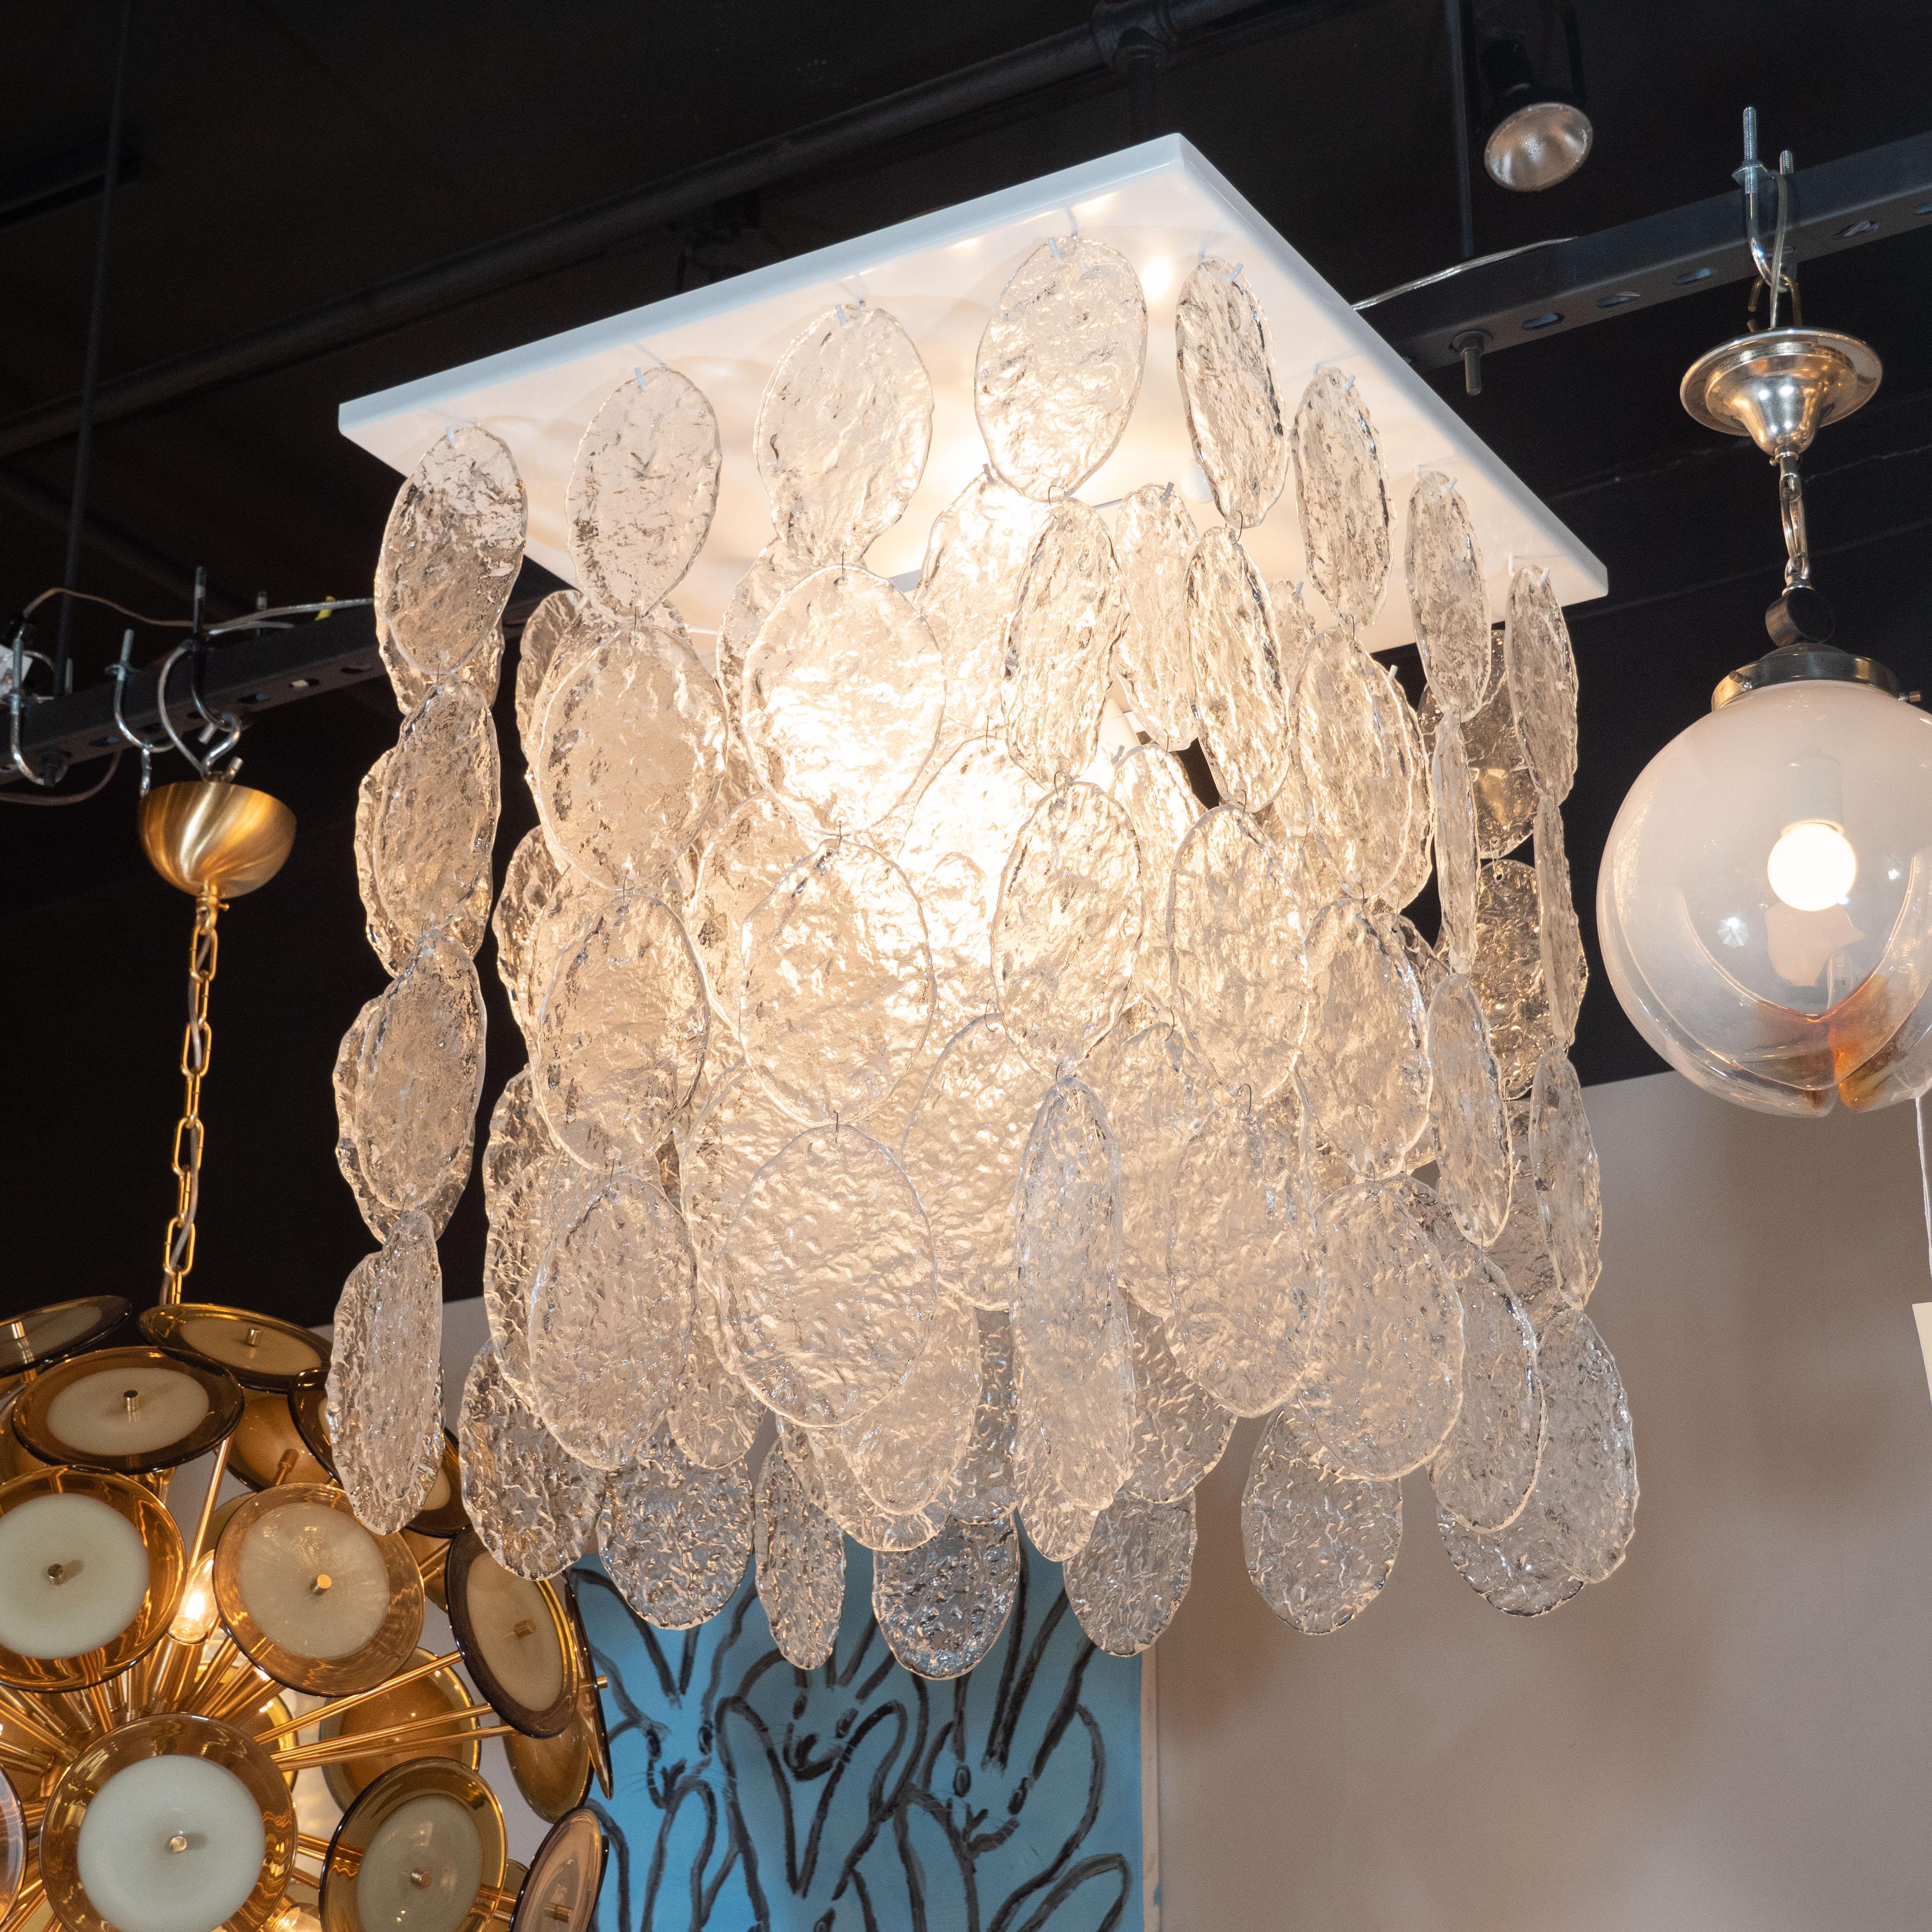 This dramatic chandelier was realized in Murano, Italy- the island off the coast of Venice renowned for centuries for its superlative glass production. It features an abundance of linked ovoid forms in highly textural handblown translucent Murano